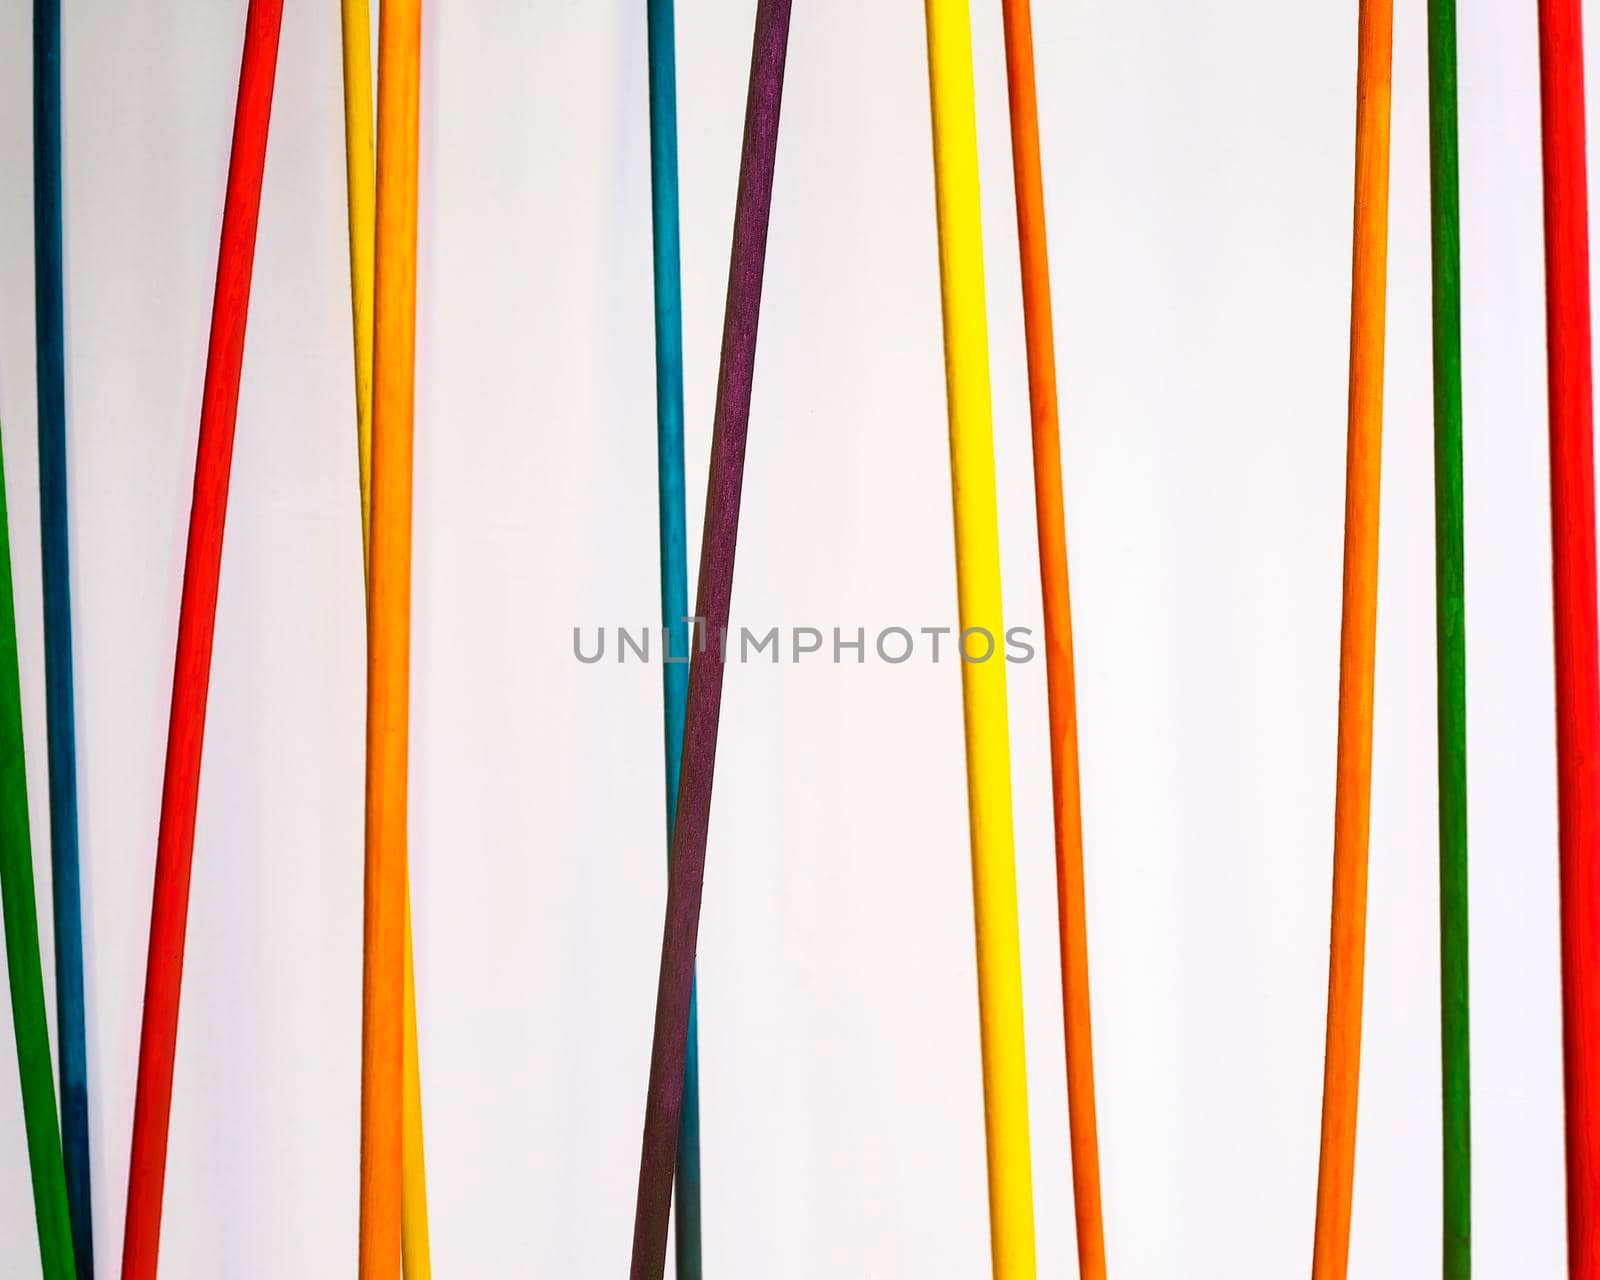 Colored dowels hang against a white background.